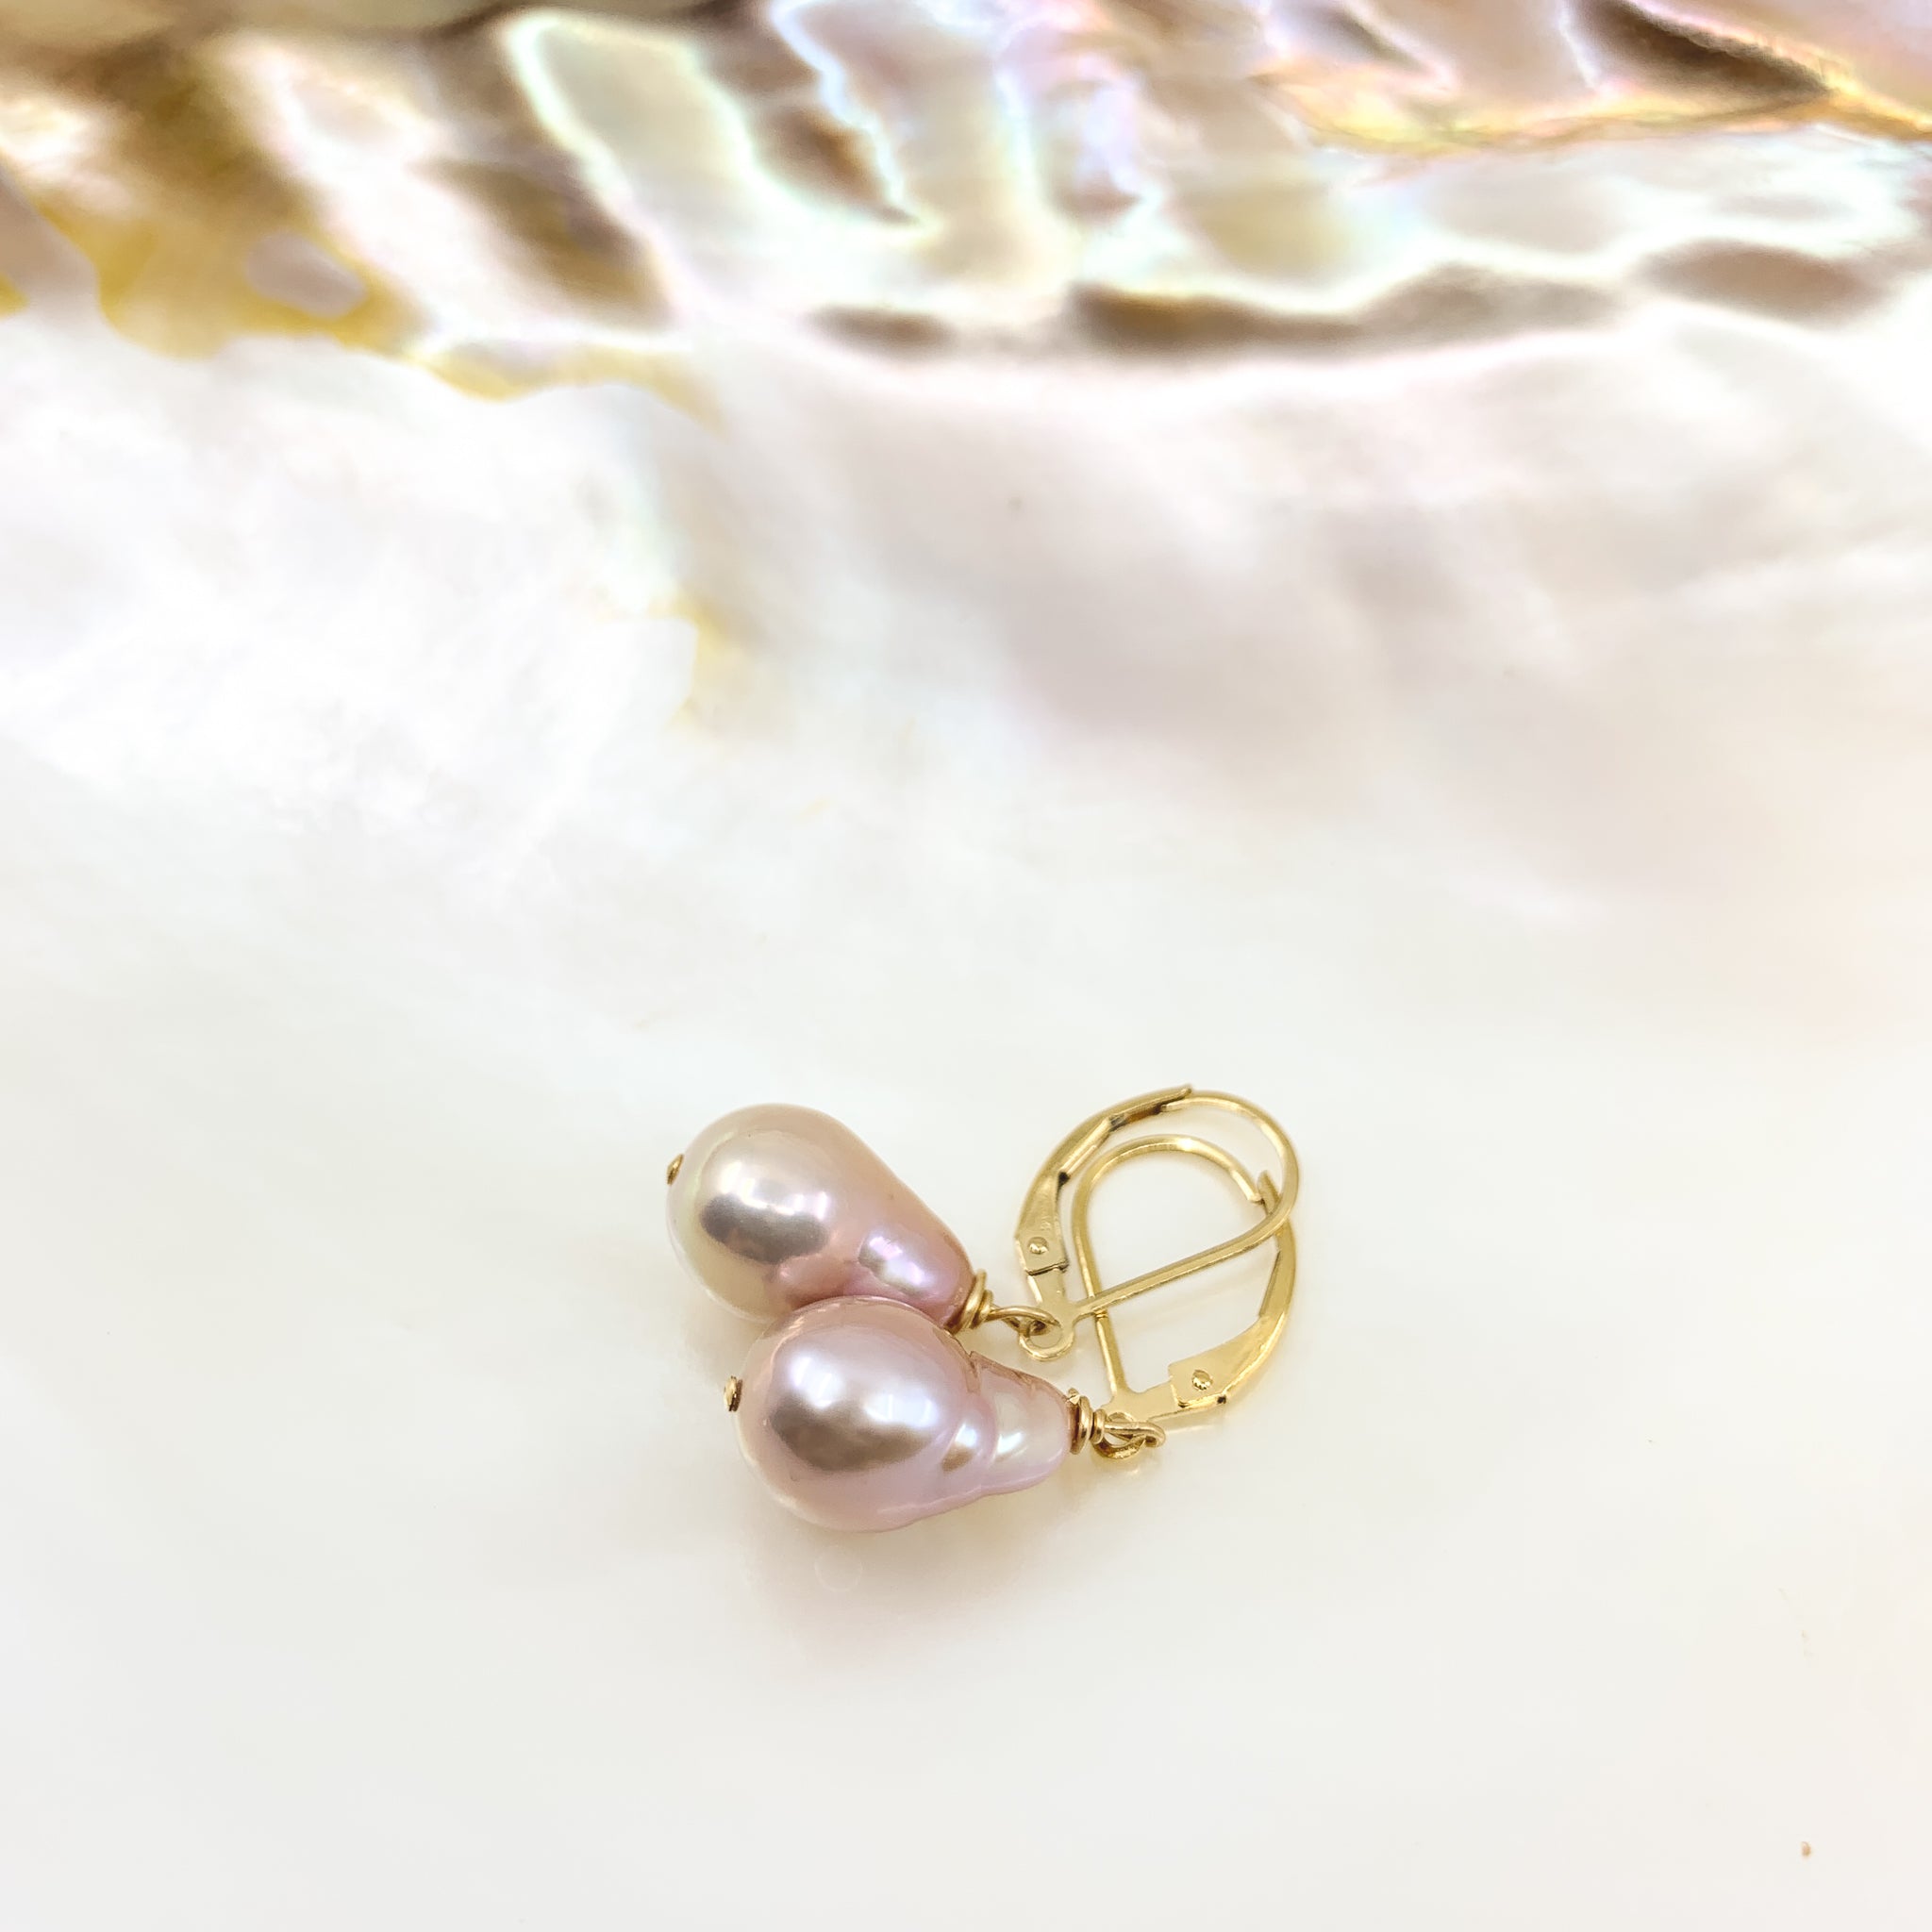 natural pink baroque pearl earrings with safety ear wires by eve black jewelry made in hawaii